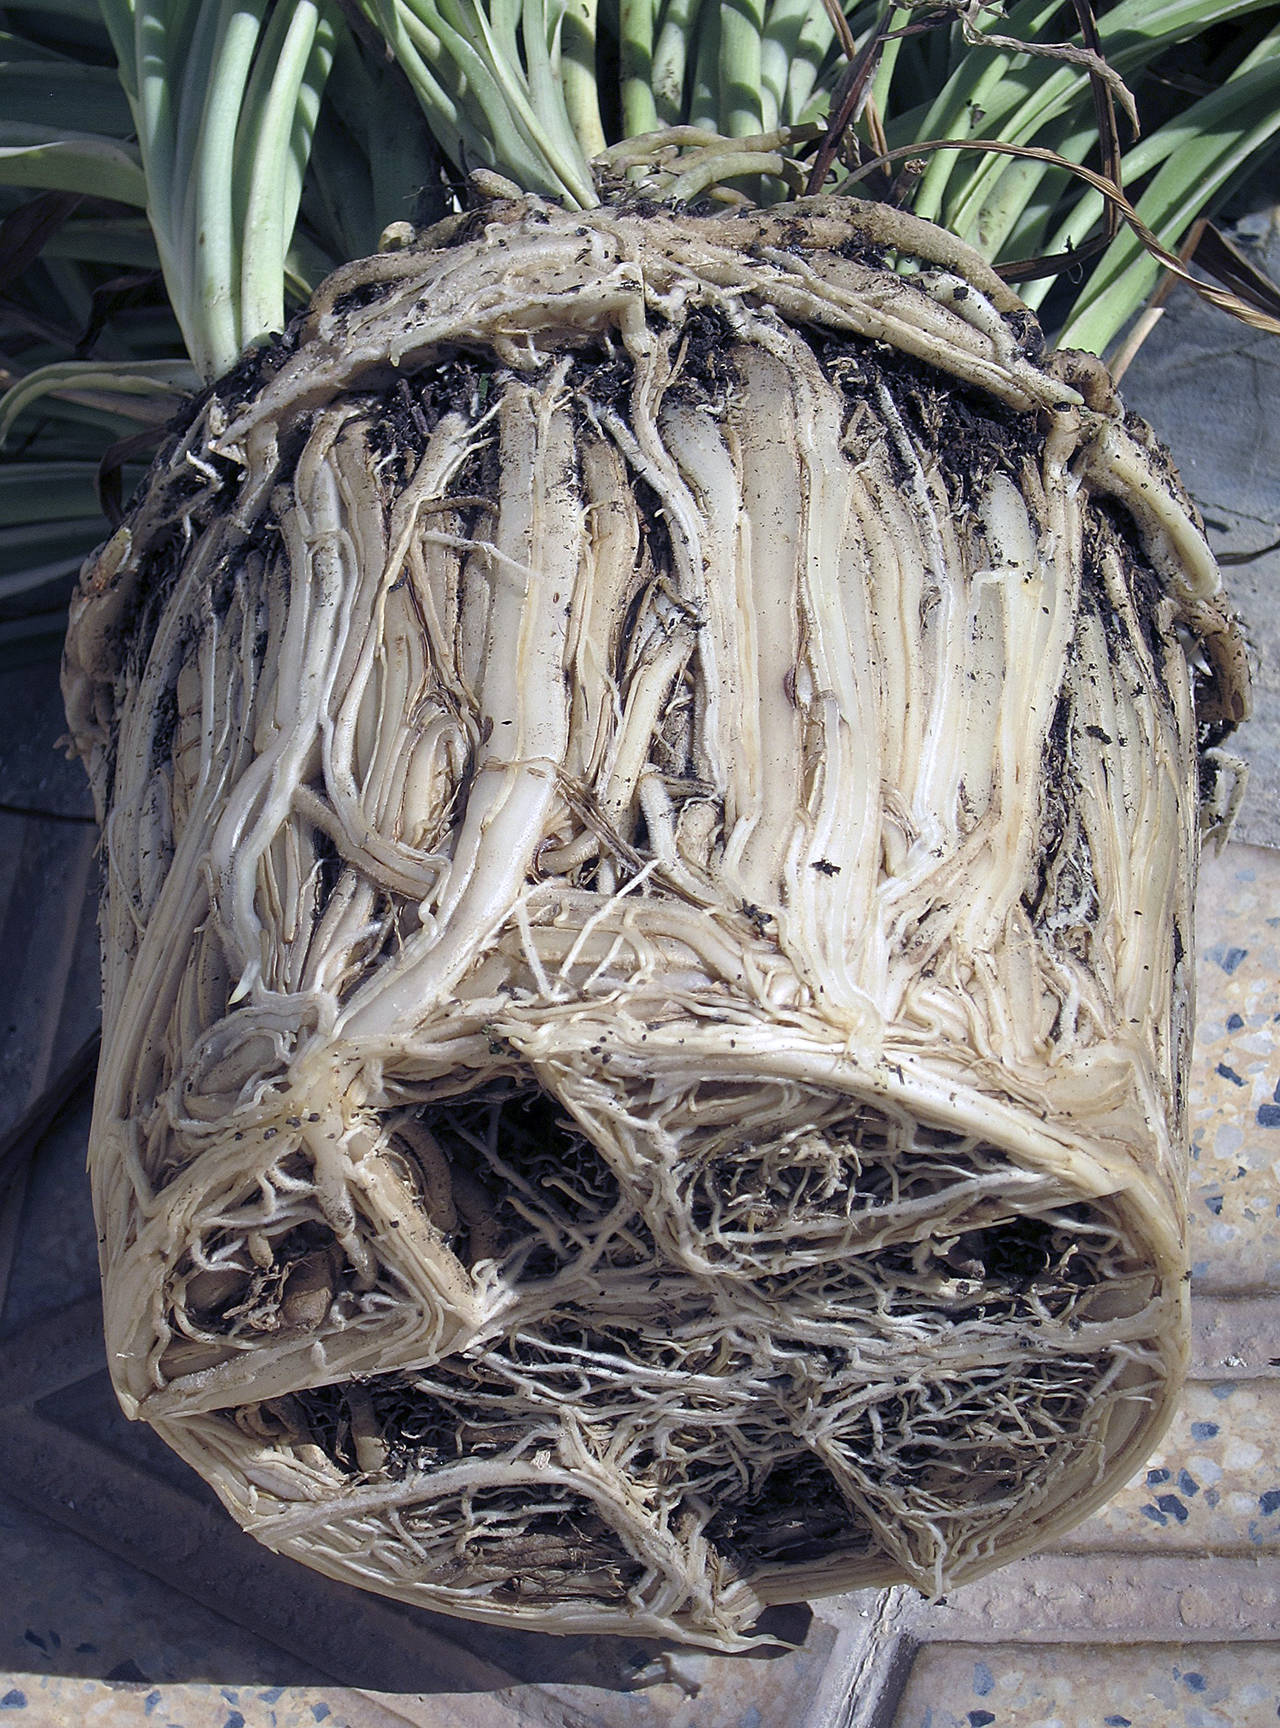 When a plant’s roots look like this, it is time to “pot up” to a larger container. (Keith Williamson)